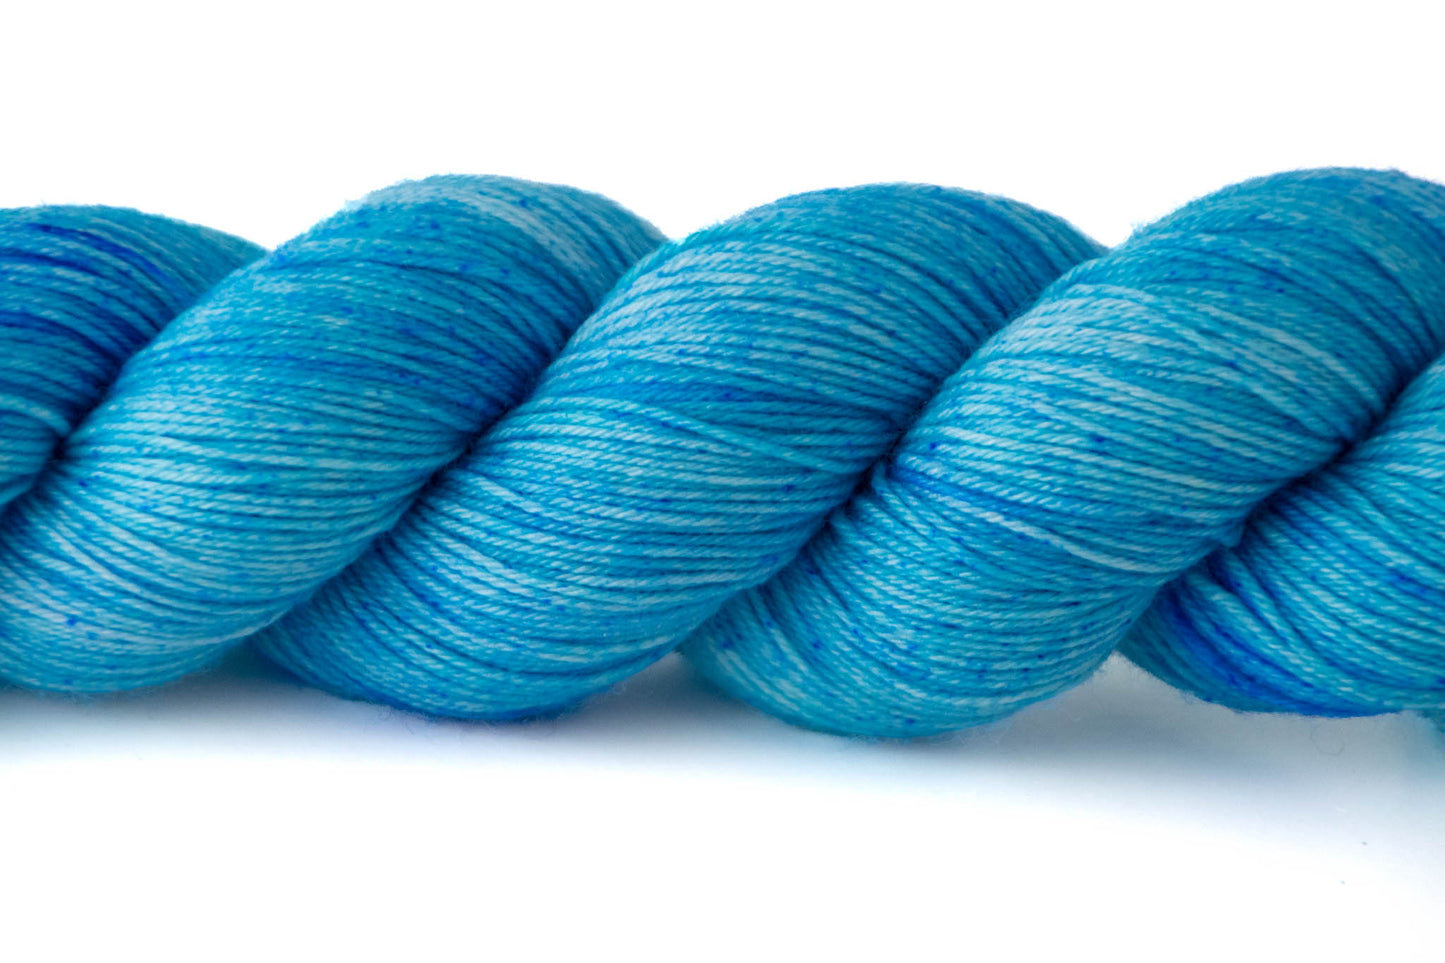 Closeup on the tonal qualities of the Blue Doily colorway.